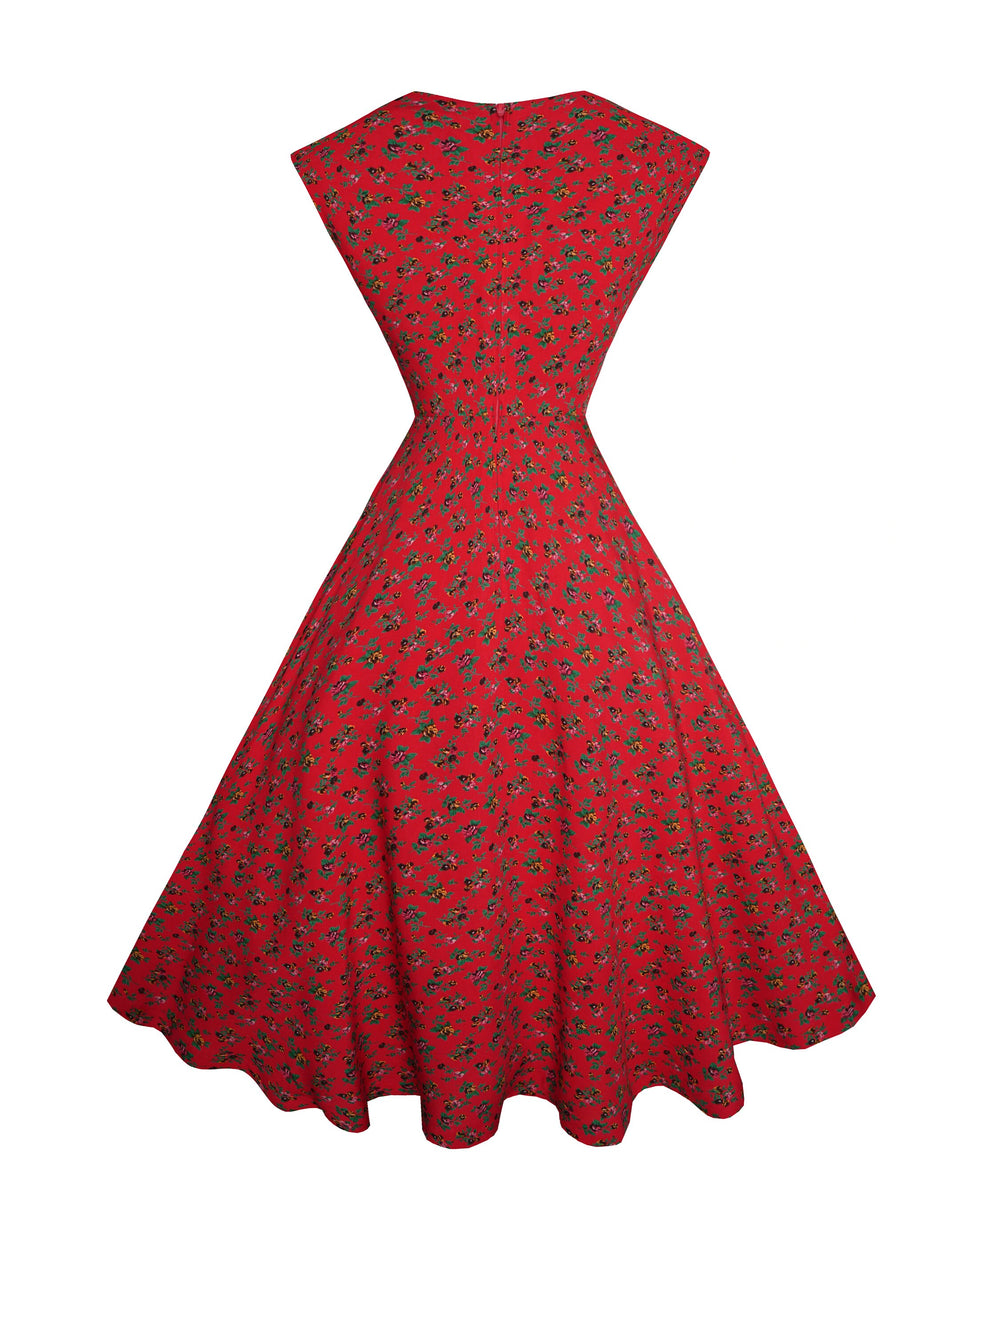 MTO - Kennedy Dress in Rayon Red "Rustic Country Roses"